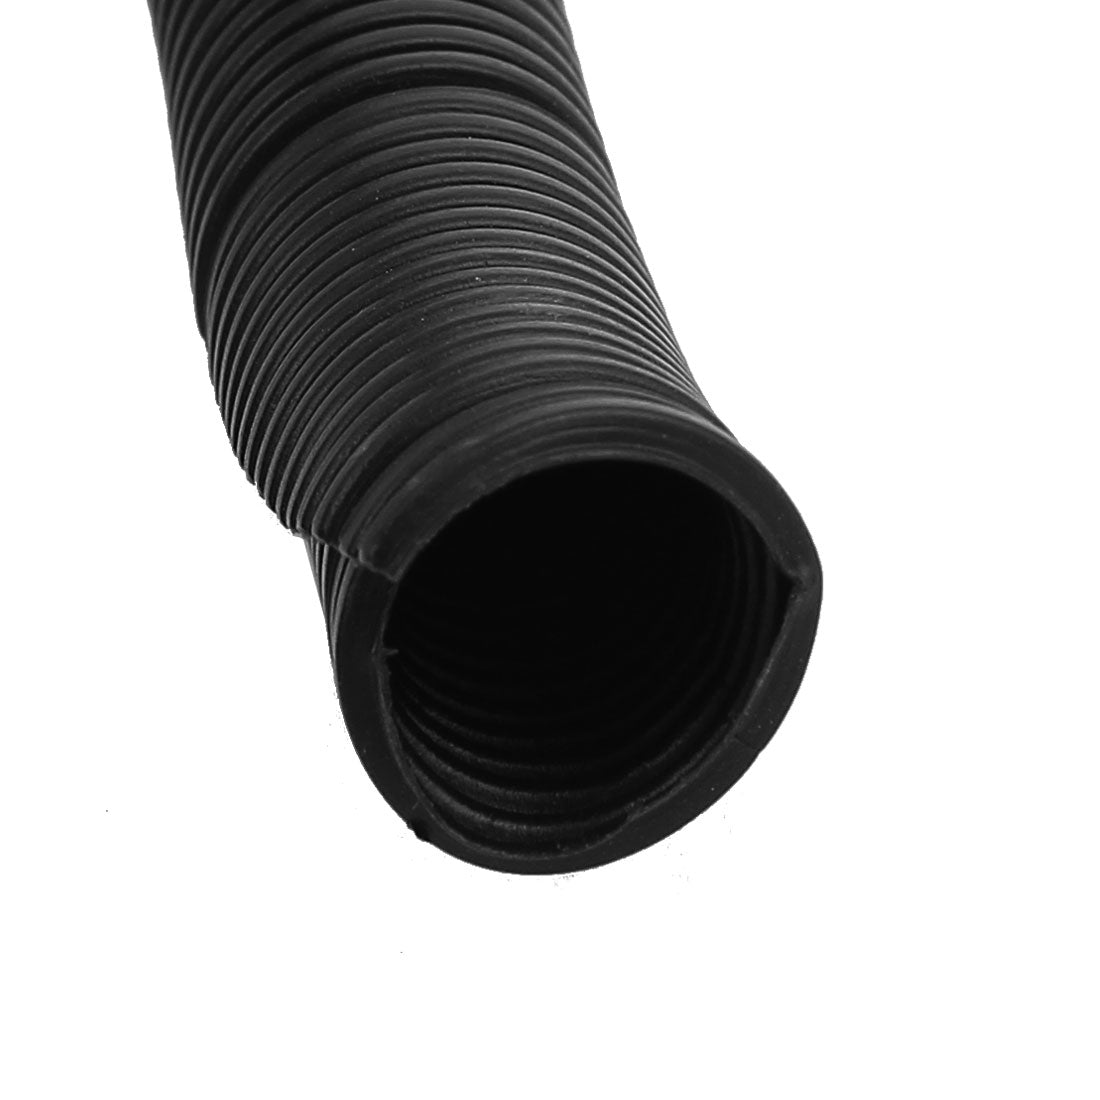 uxcell Uxcell 10 M 17 x 20 mm Plastic Split Corrugated Conduit Tube for Garden,Office Black